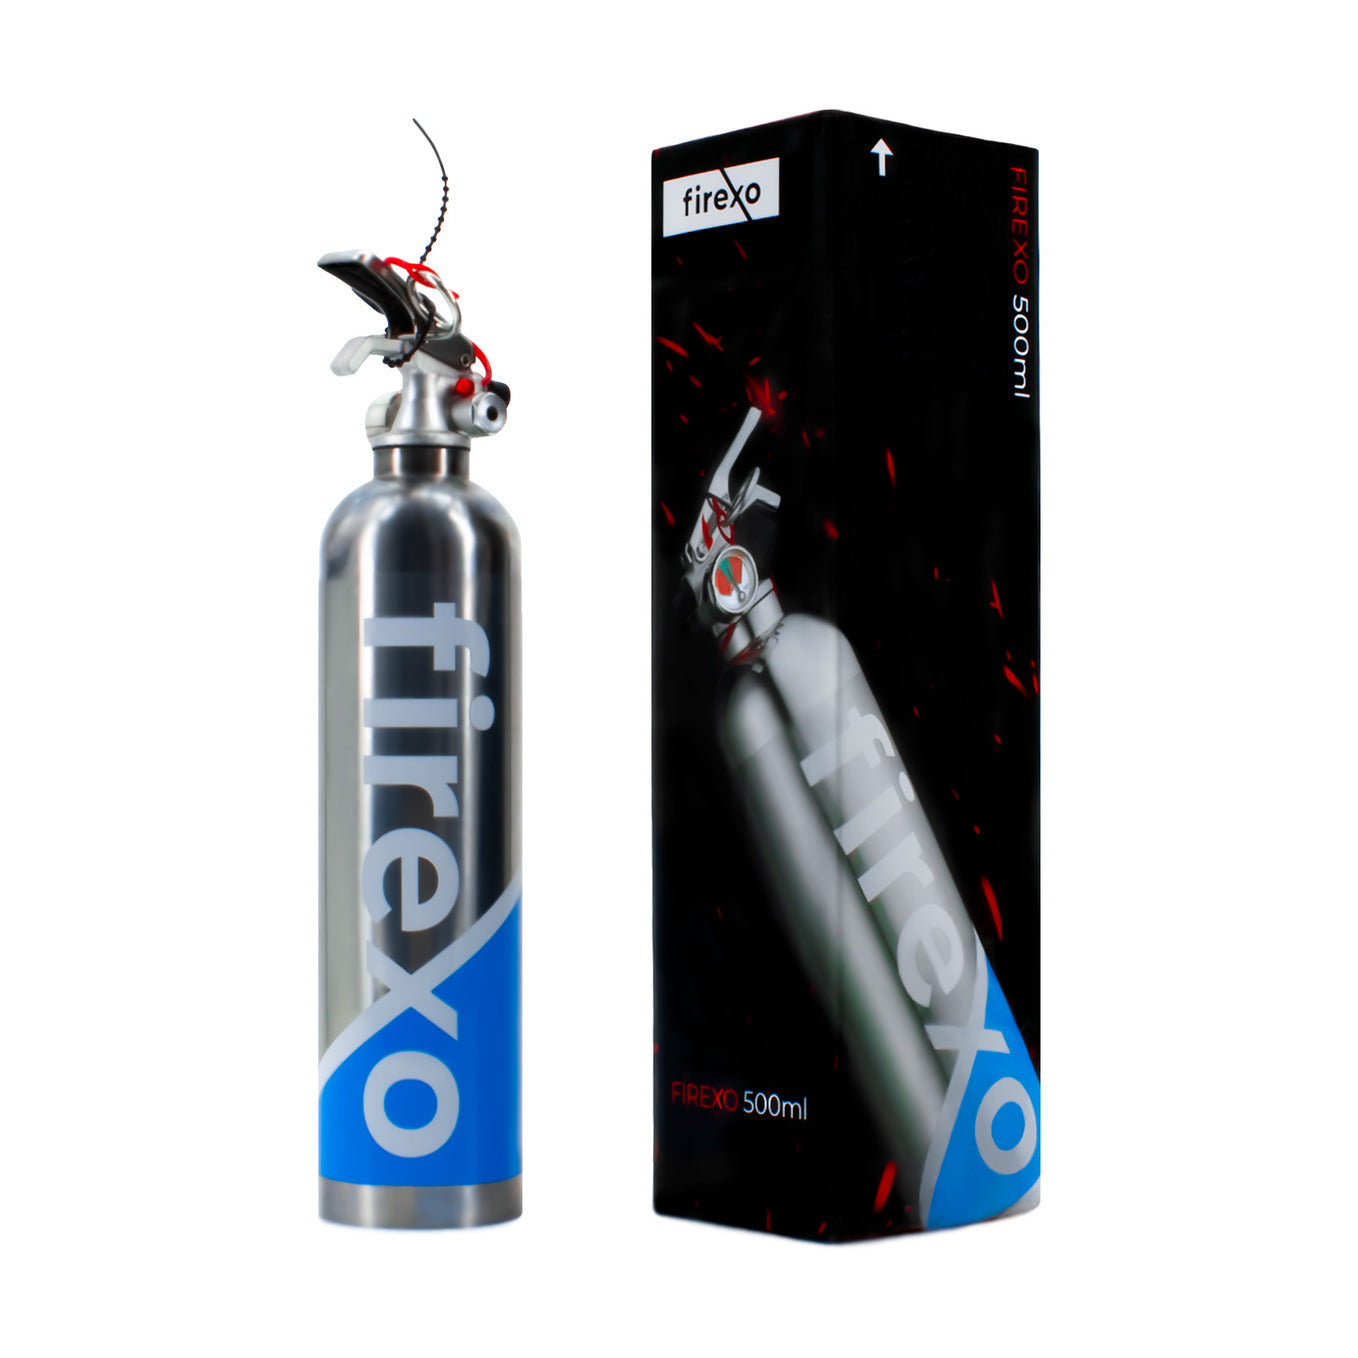 Firexo 500ml Small Fire Extinguisher in Stainless Steel